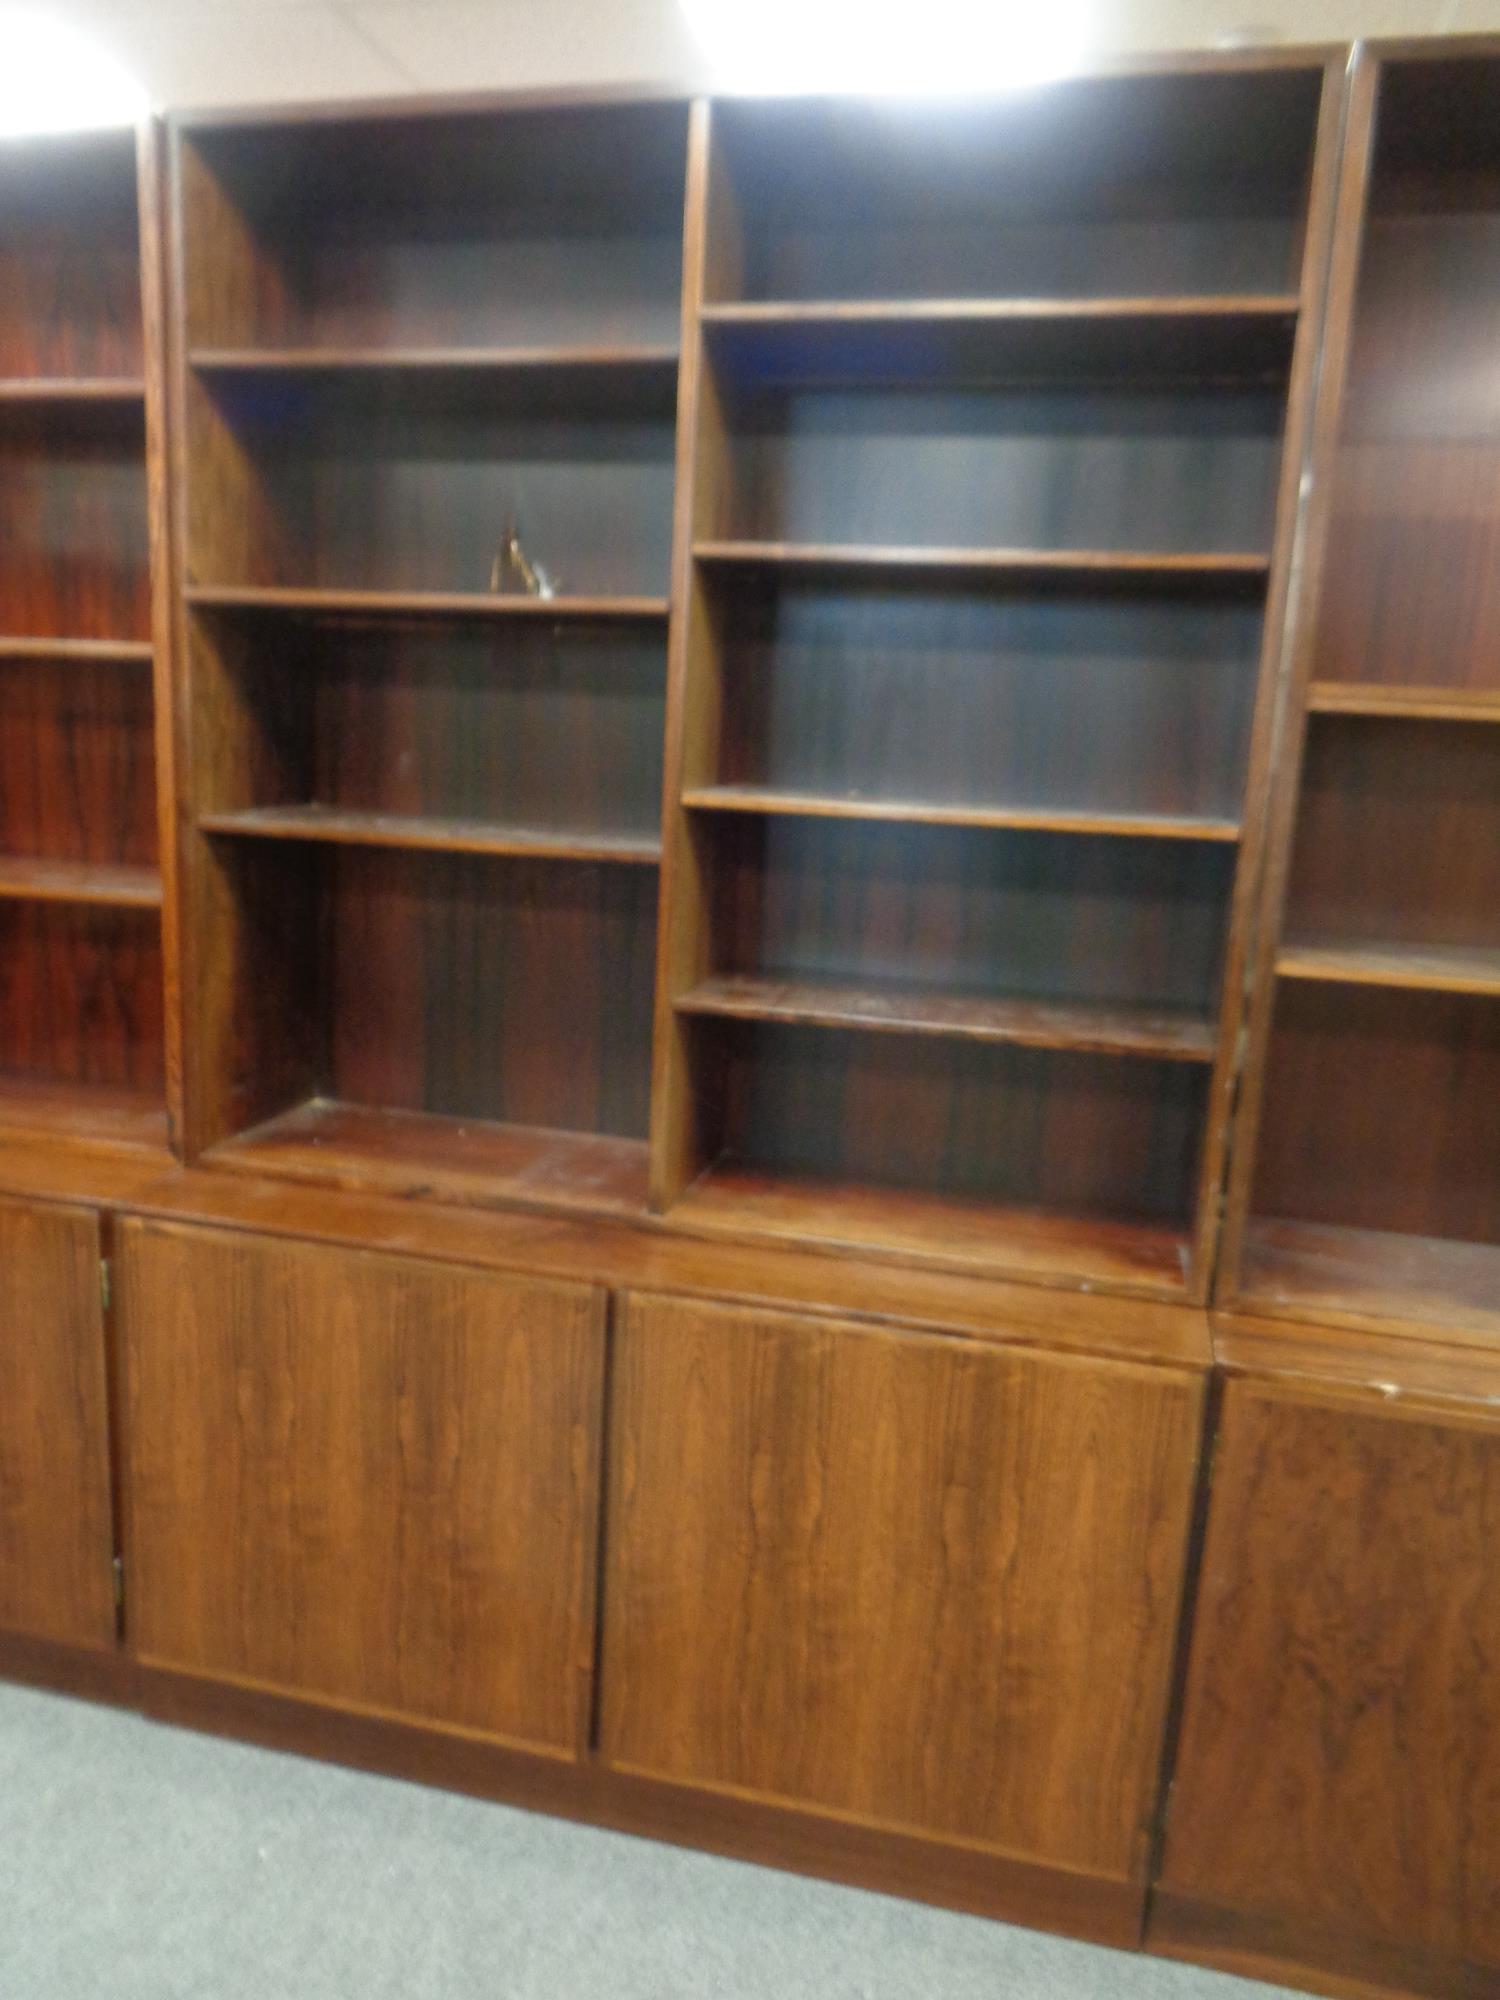 A 20th century rosewood veneer three part book case with fitted cupboards beneath (As found) - Image 2 of 2